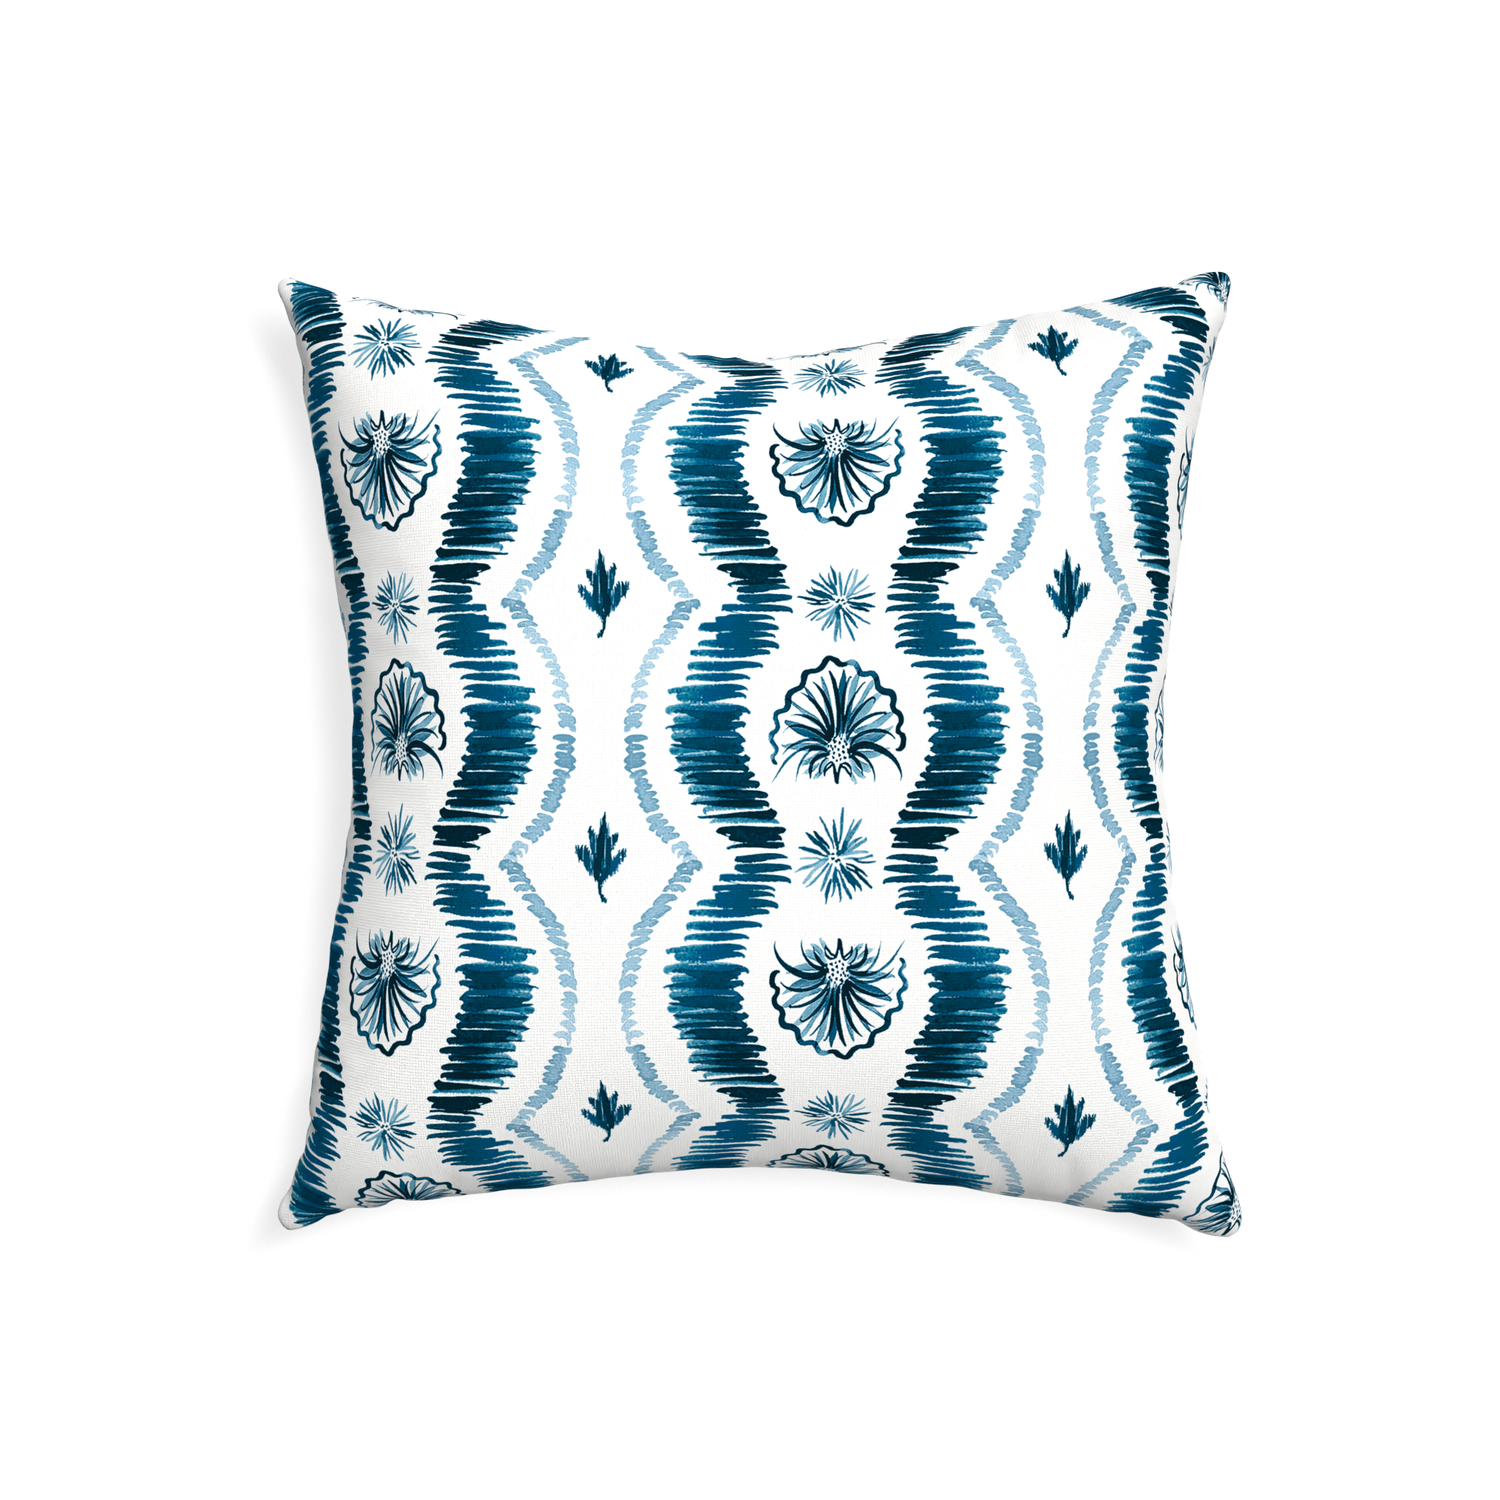 22-square alice custom blue ikatpillow with none on white background